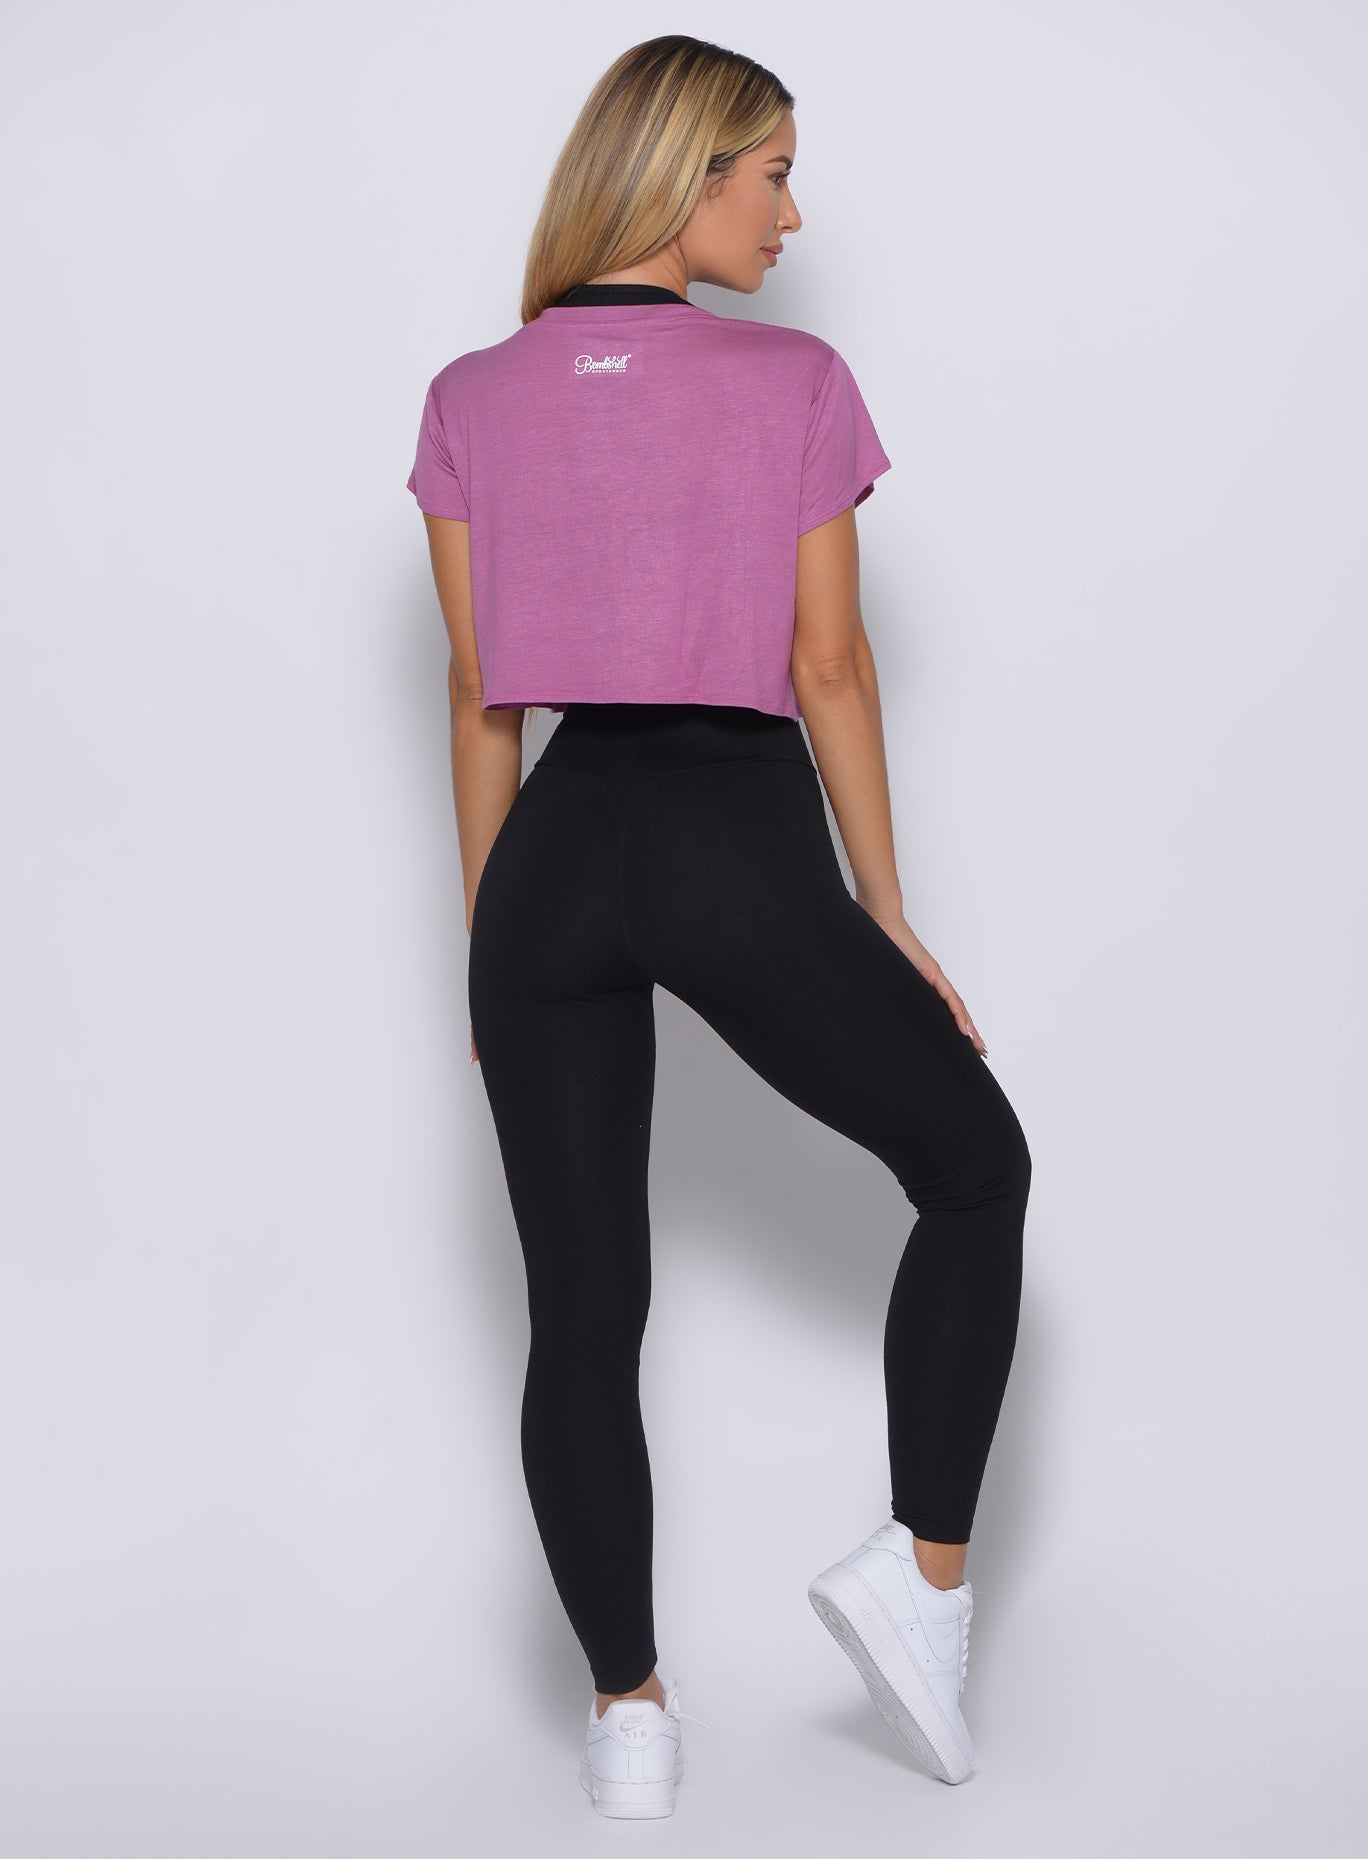 Back profile view of a model in our freedom tee in strawberry pink color along with a black high waisted leggings